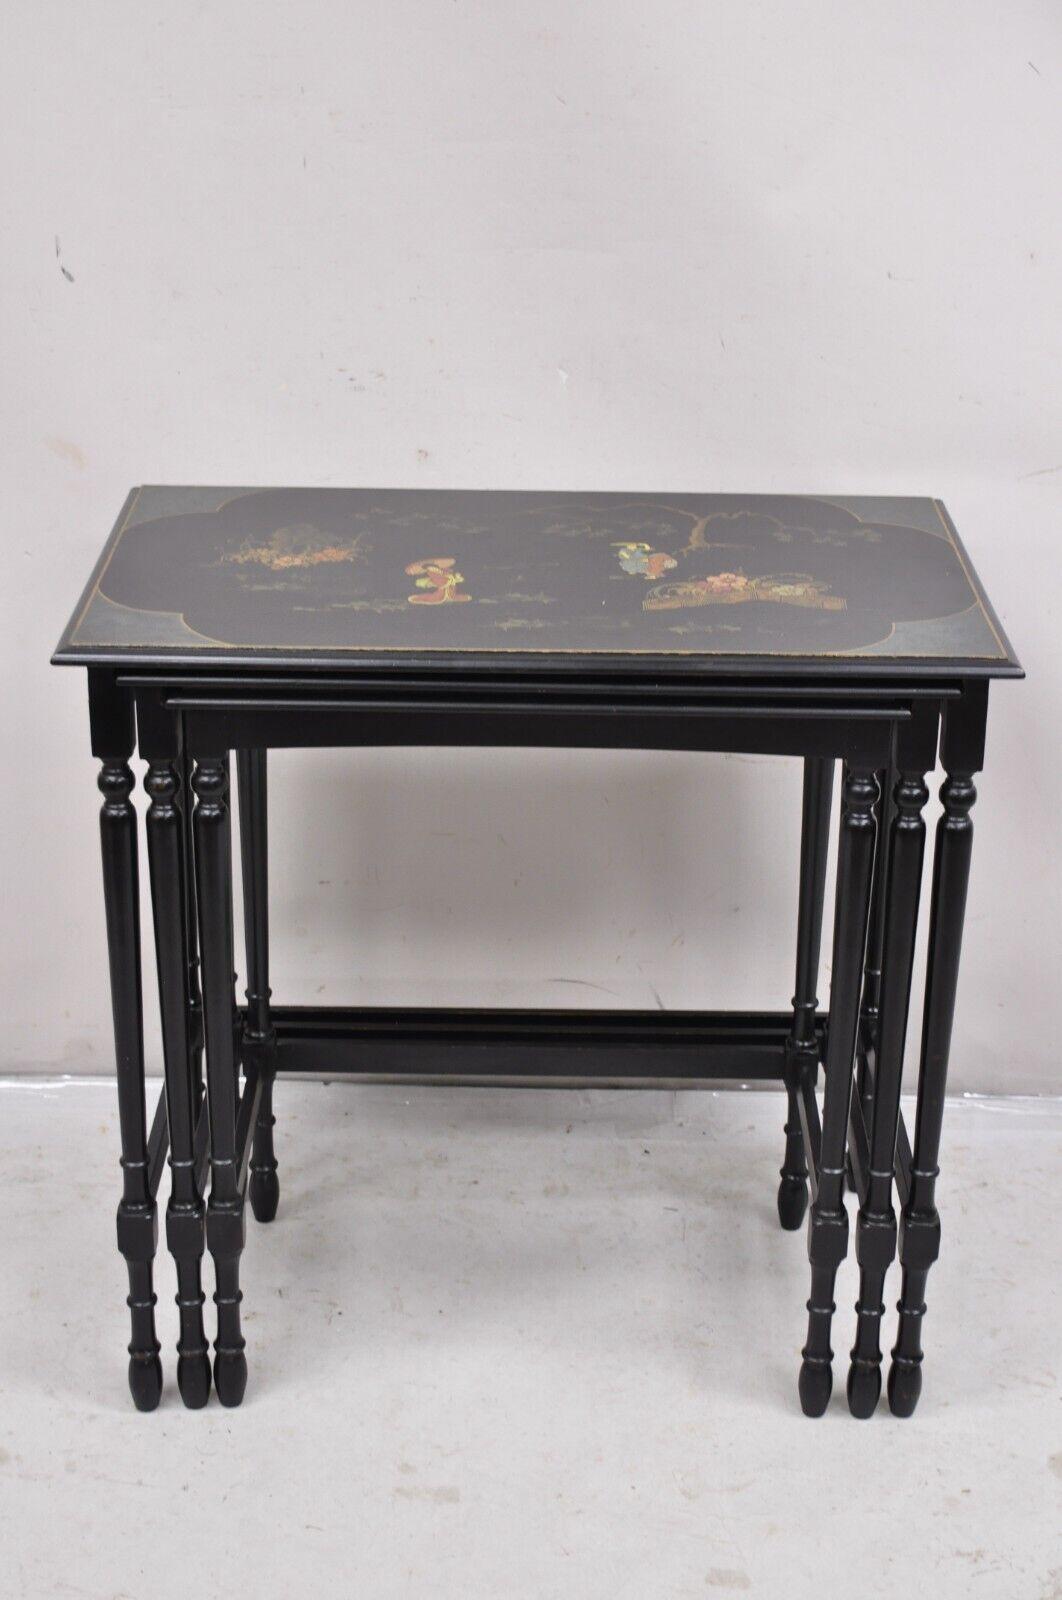 Vintage Chinoiserie Asian Inspired Black Nesting Side Tables by Paalman - Set of 3. Circa  Early to Mid 20th Century.
Measurements: 
Large: 29